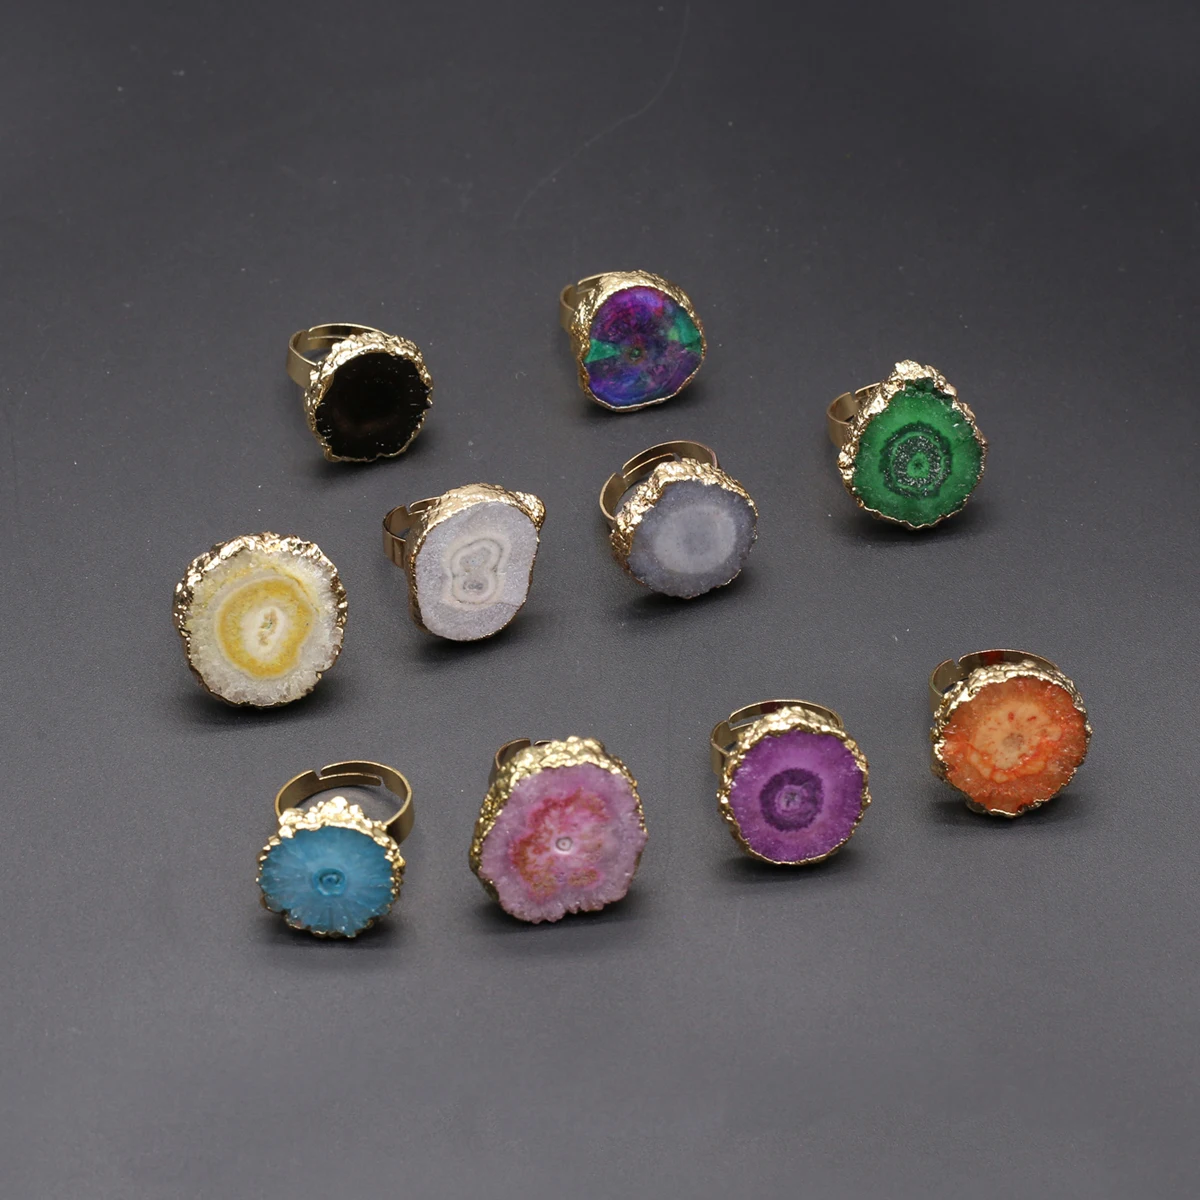 

Natural Semi Precious Stones Irregular Crystal Druzy Rings Reiki Healing Embryo Agate Jewelry Accessories Party Gifts for Women